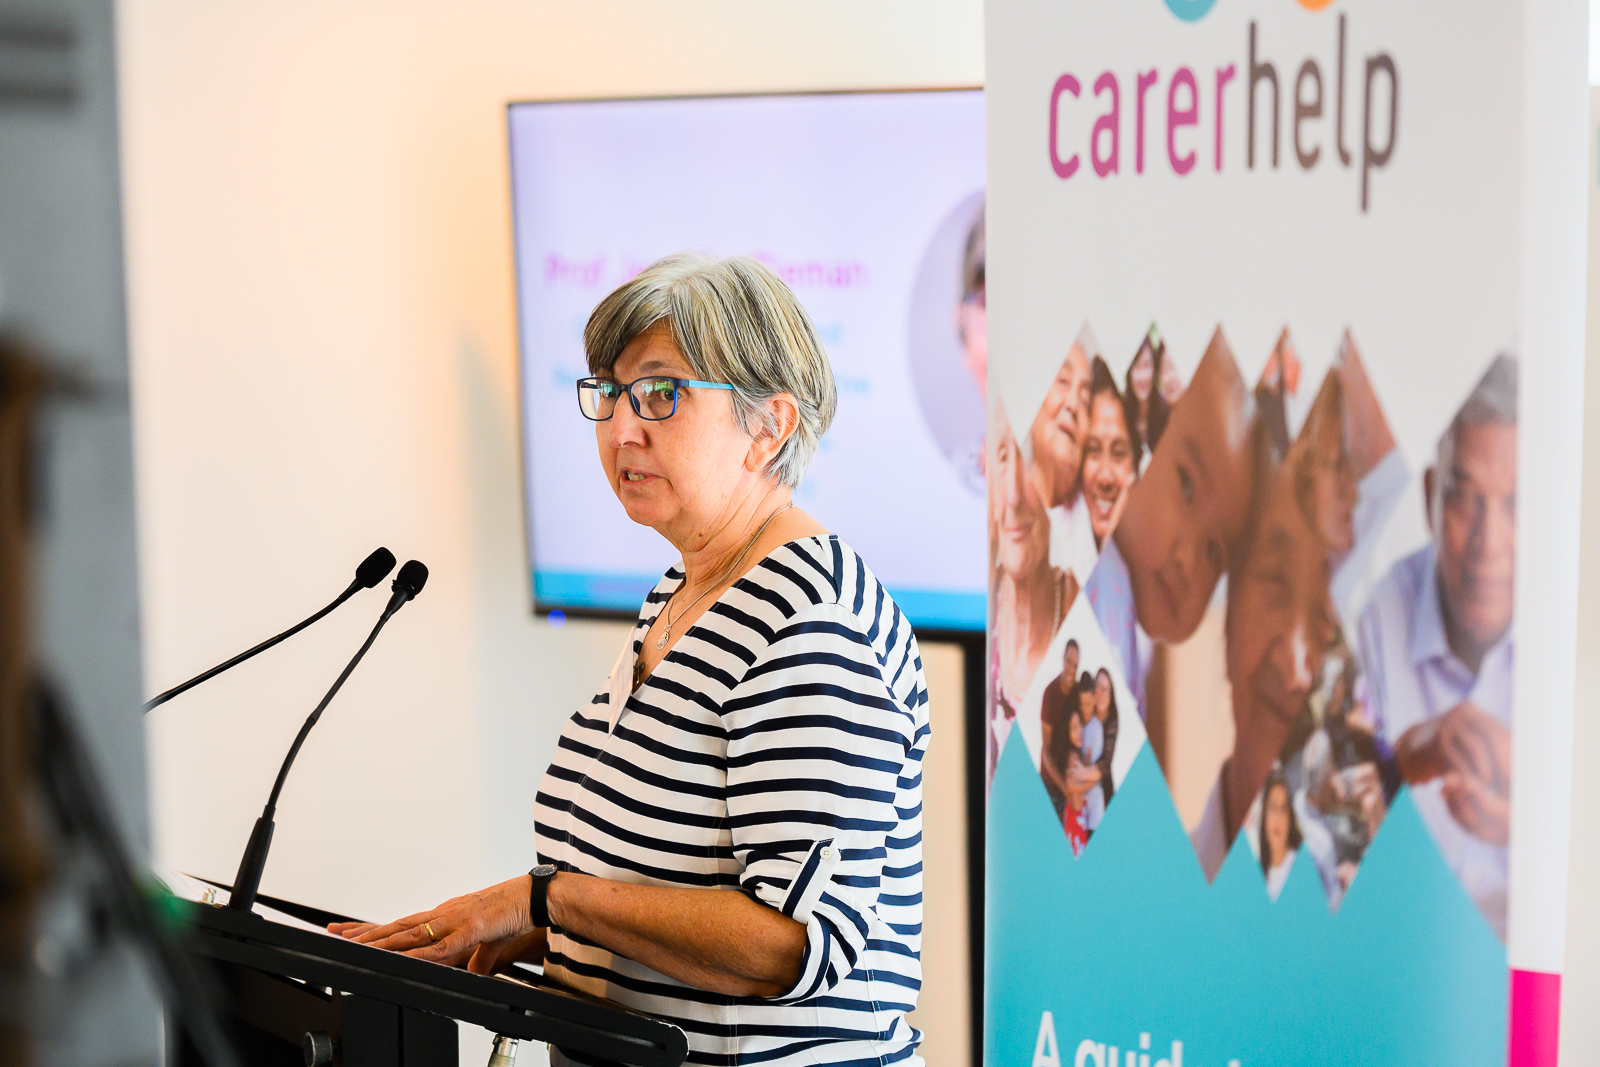 Professor Jennifer Tieman presenting the features of CarerHelp at the CarerHelp launch. She is standing at a lectern with a CarerHelp banner behind her.